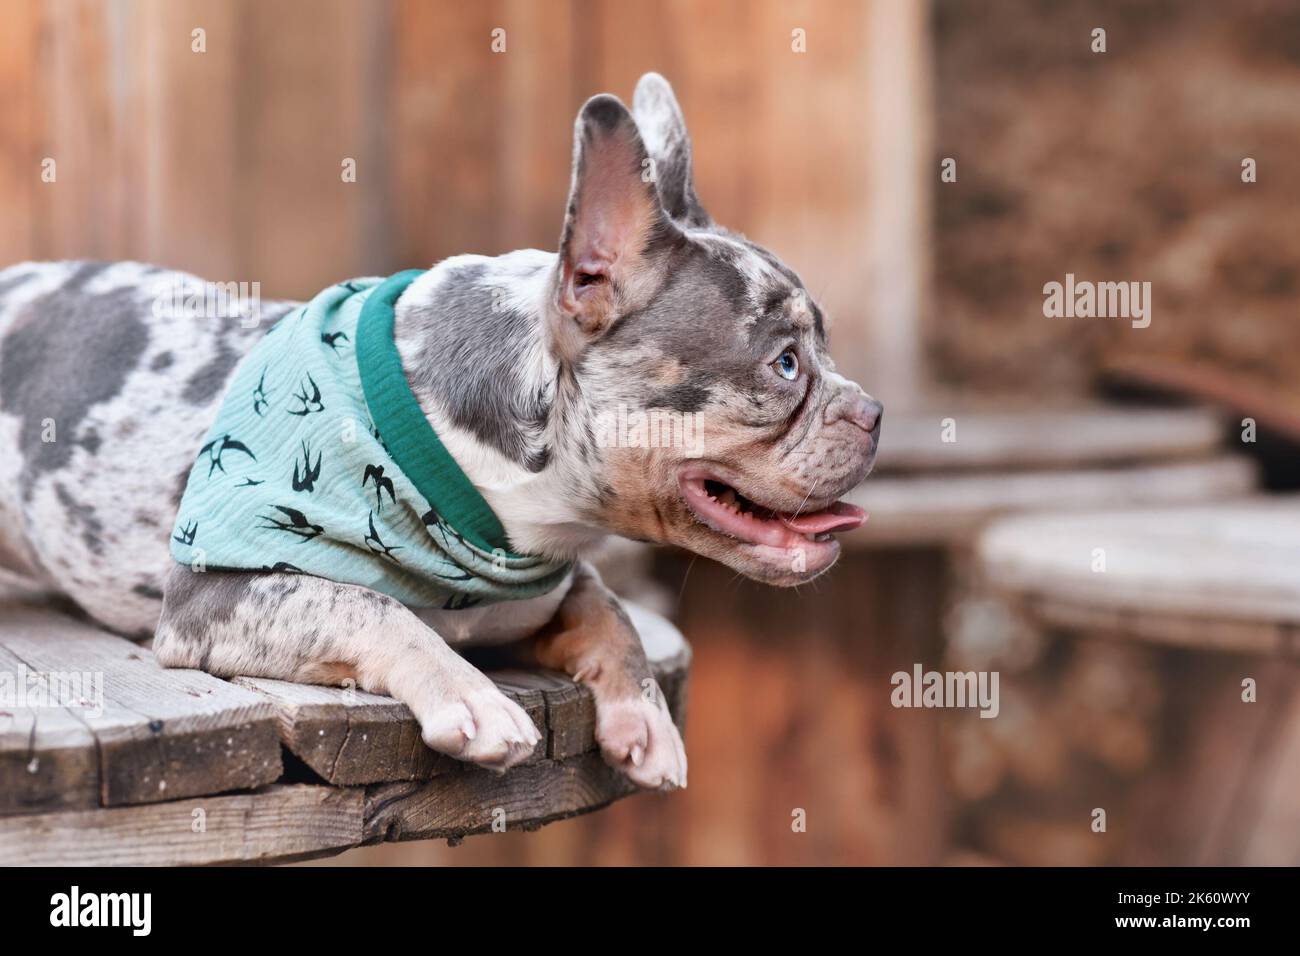 French Bulldog dog with blue neckerchief lying down between wooden industrial cable drums Stock Photo